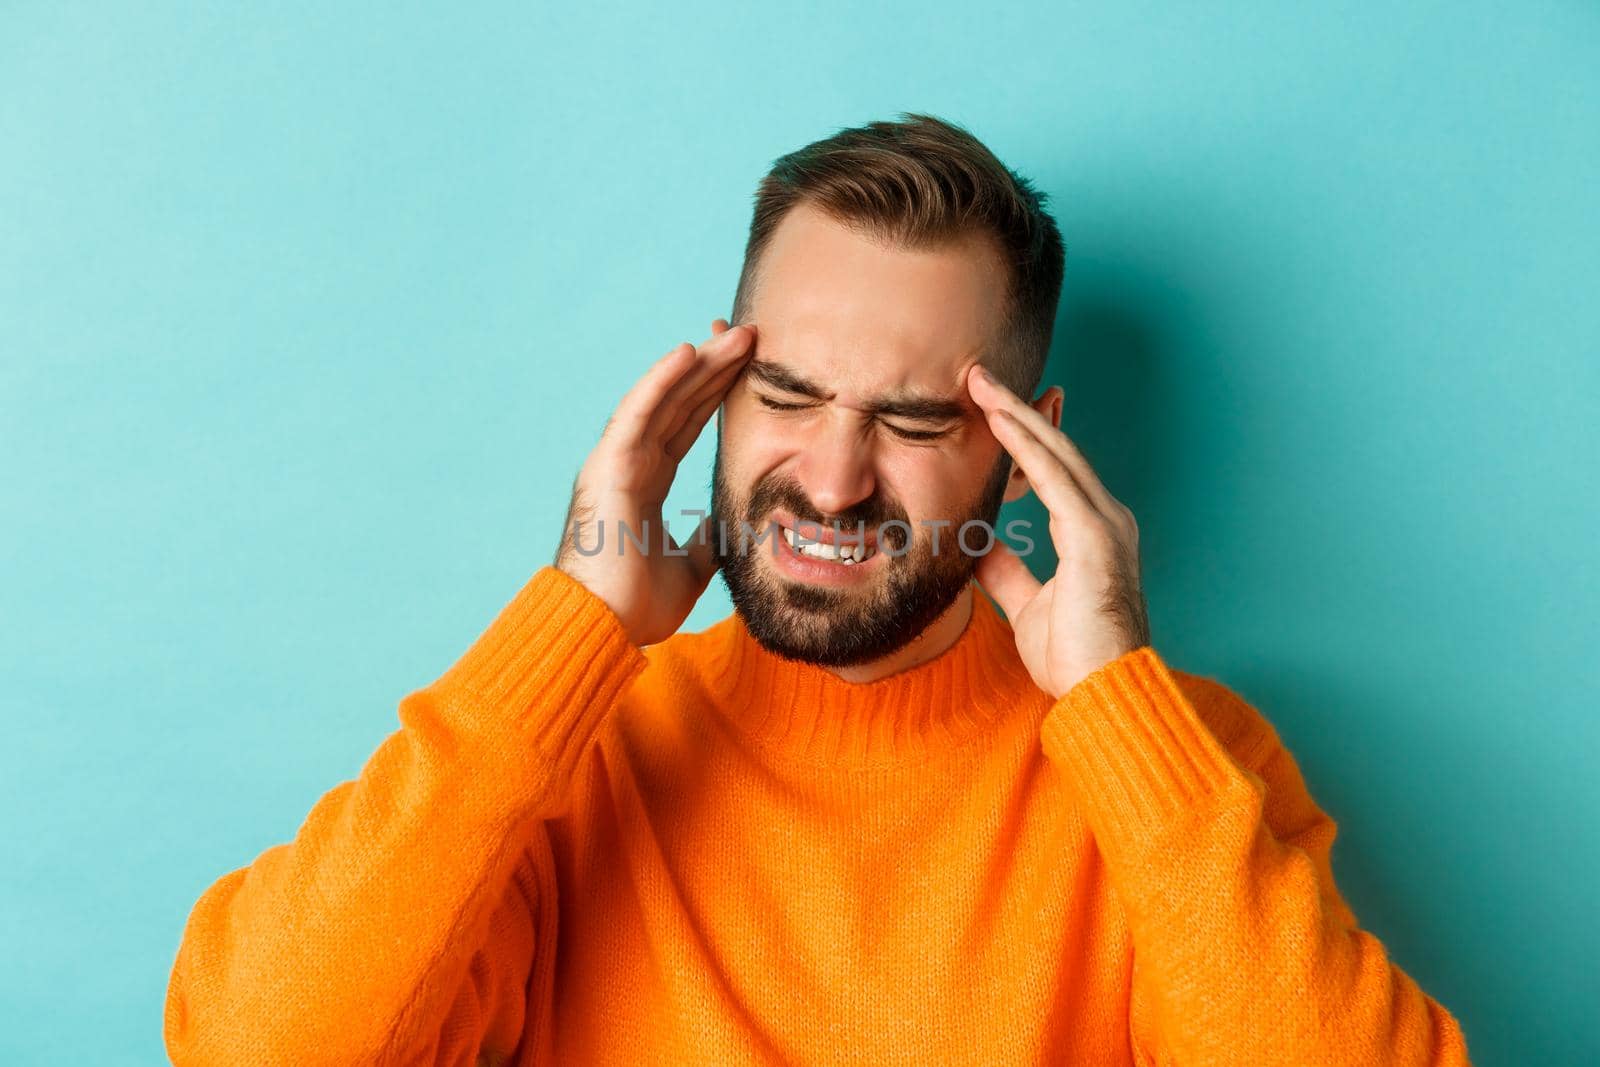 Close-up of troubled man having headache, grimacing and touching head, suffering migraine, standing over light blue background.